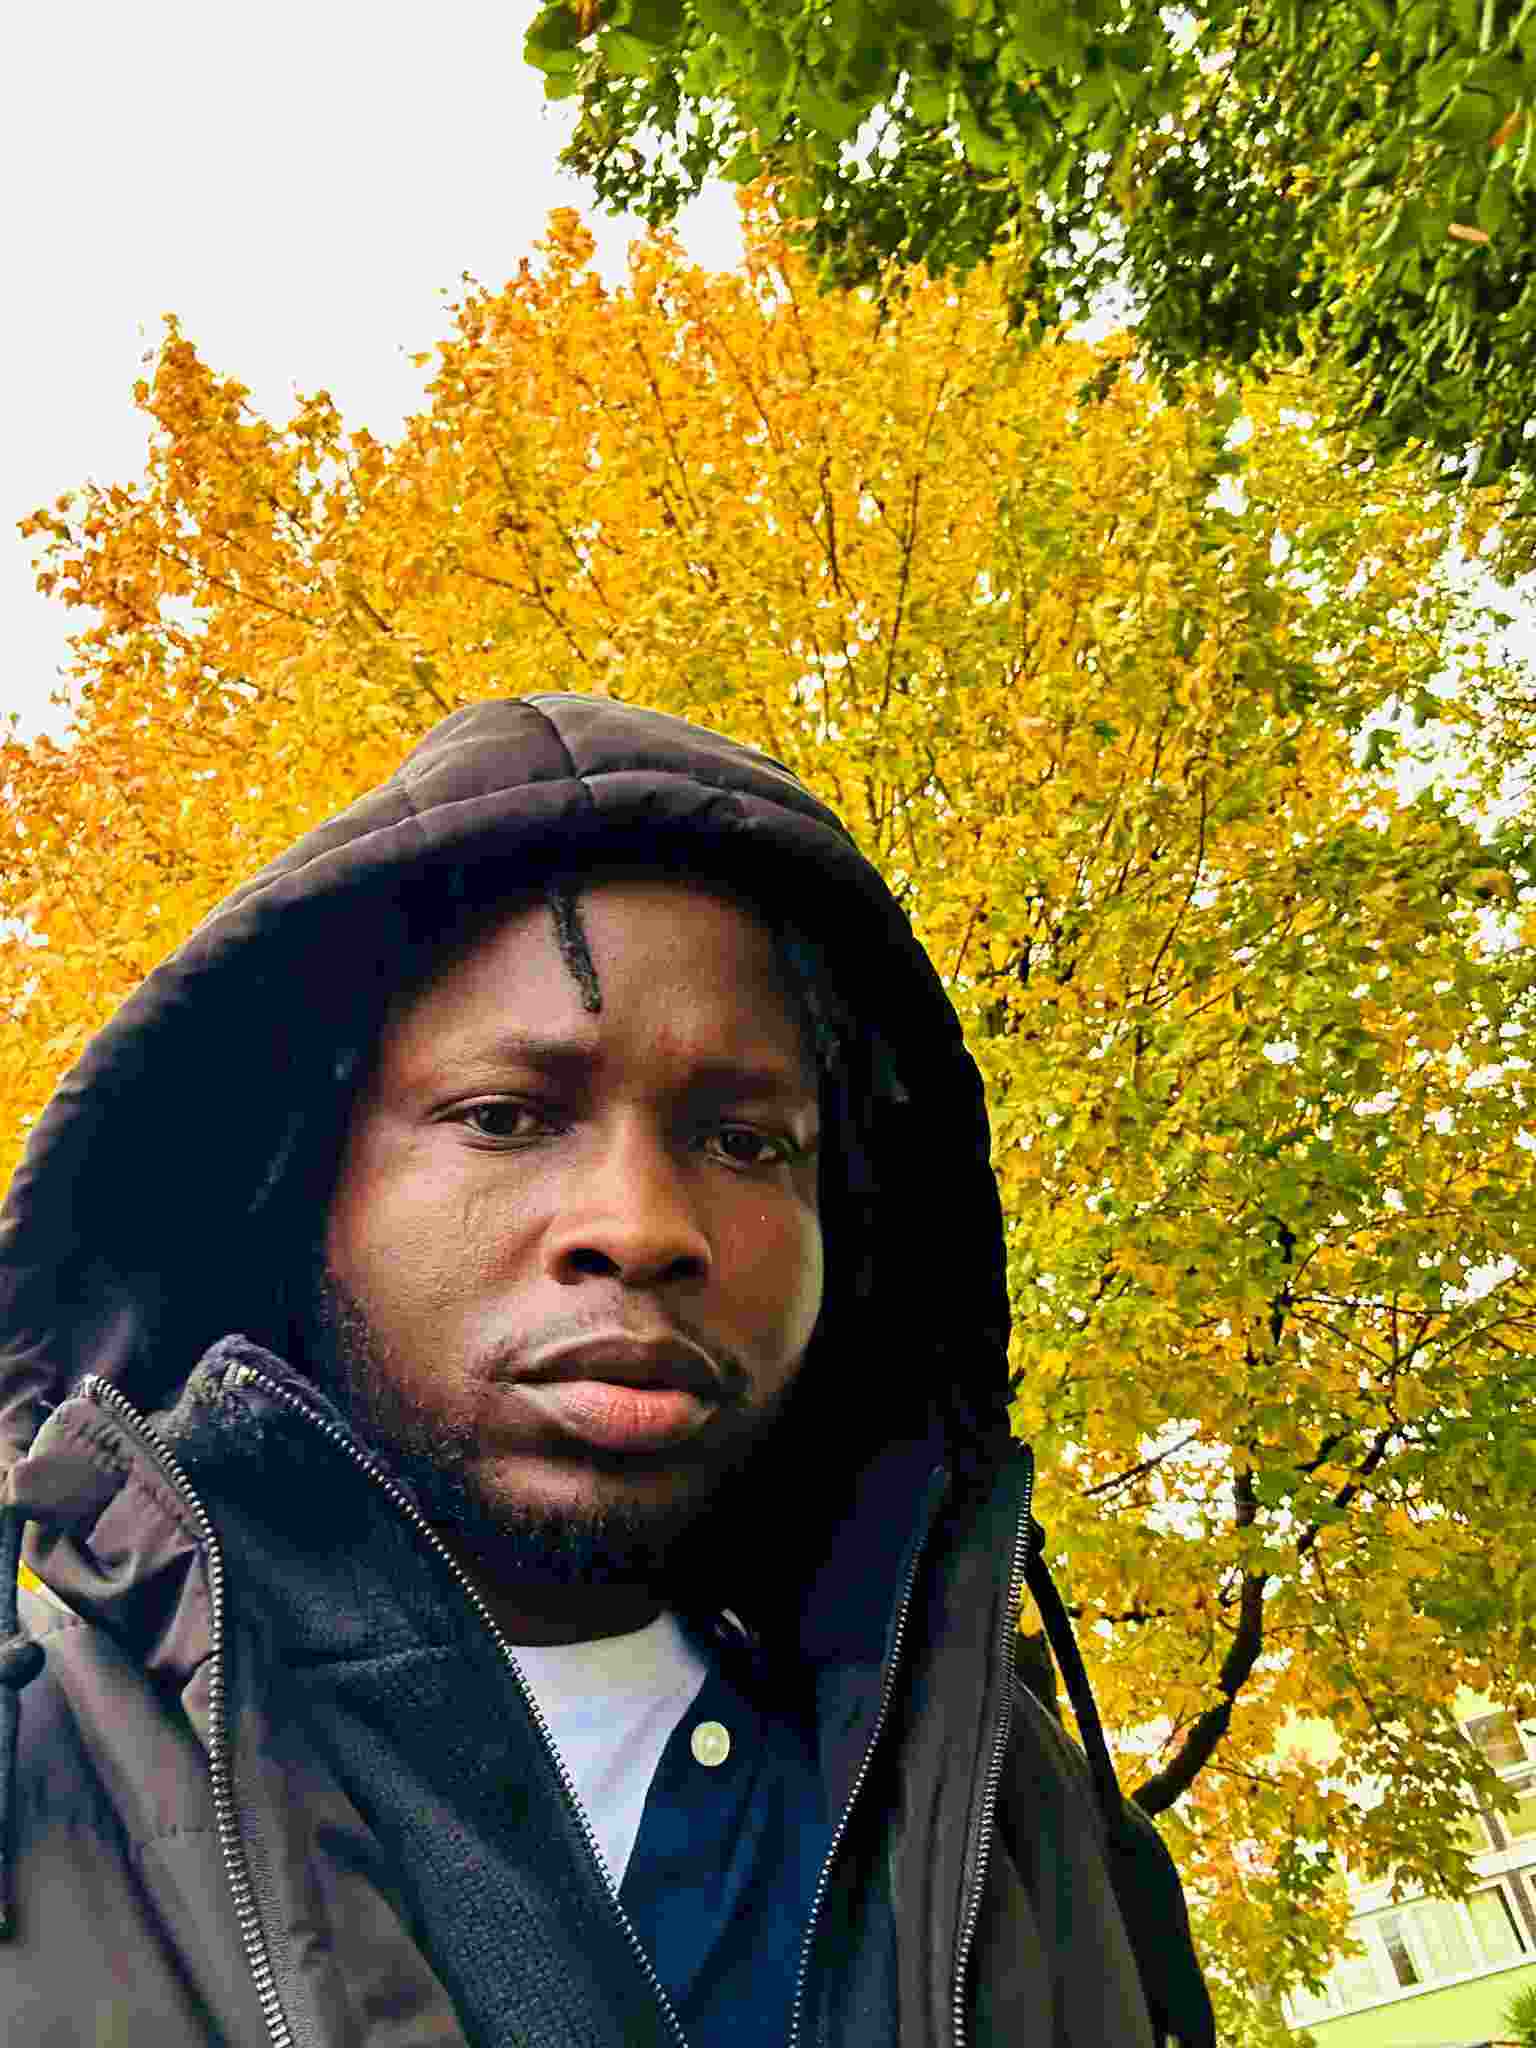 Nigerian man living in London recounts how his "Lagos street sense" helped him recover his phone after it was snatched at train station